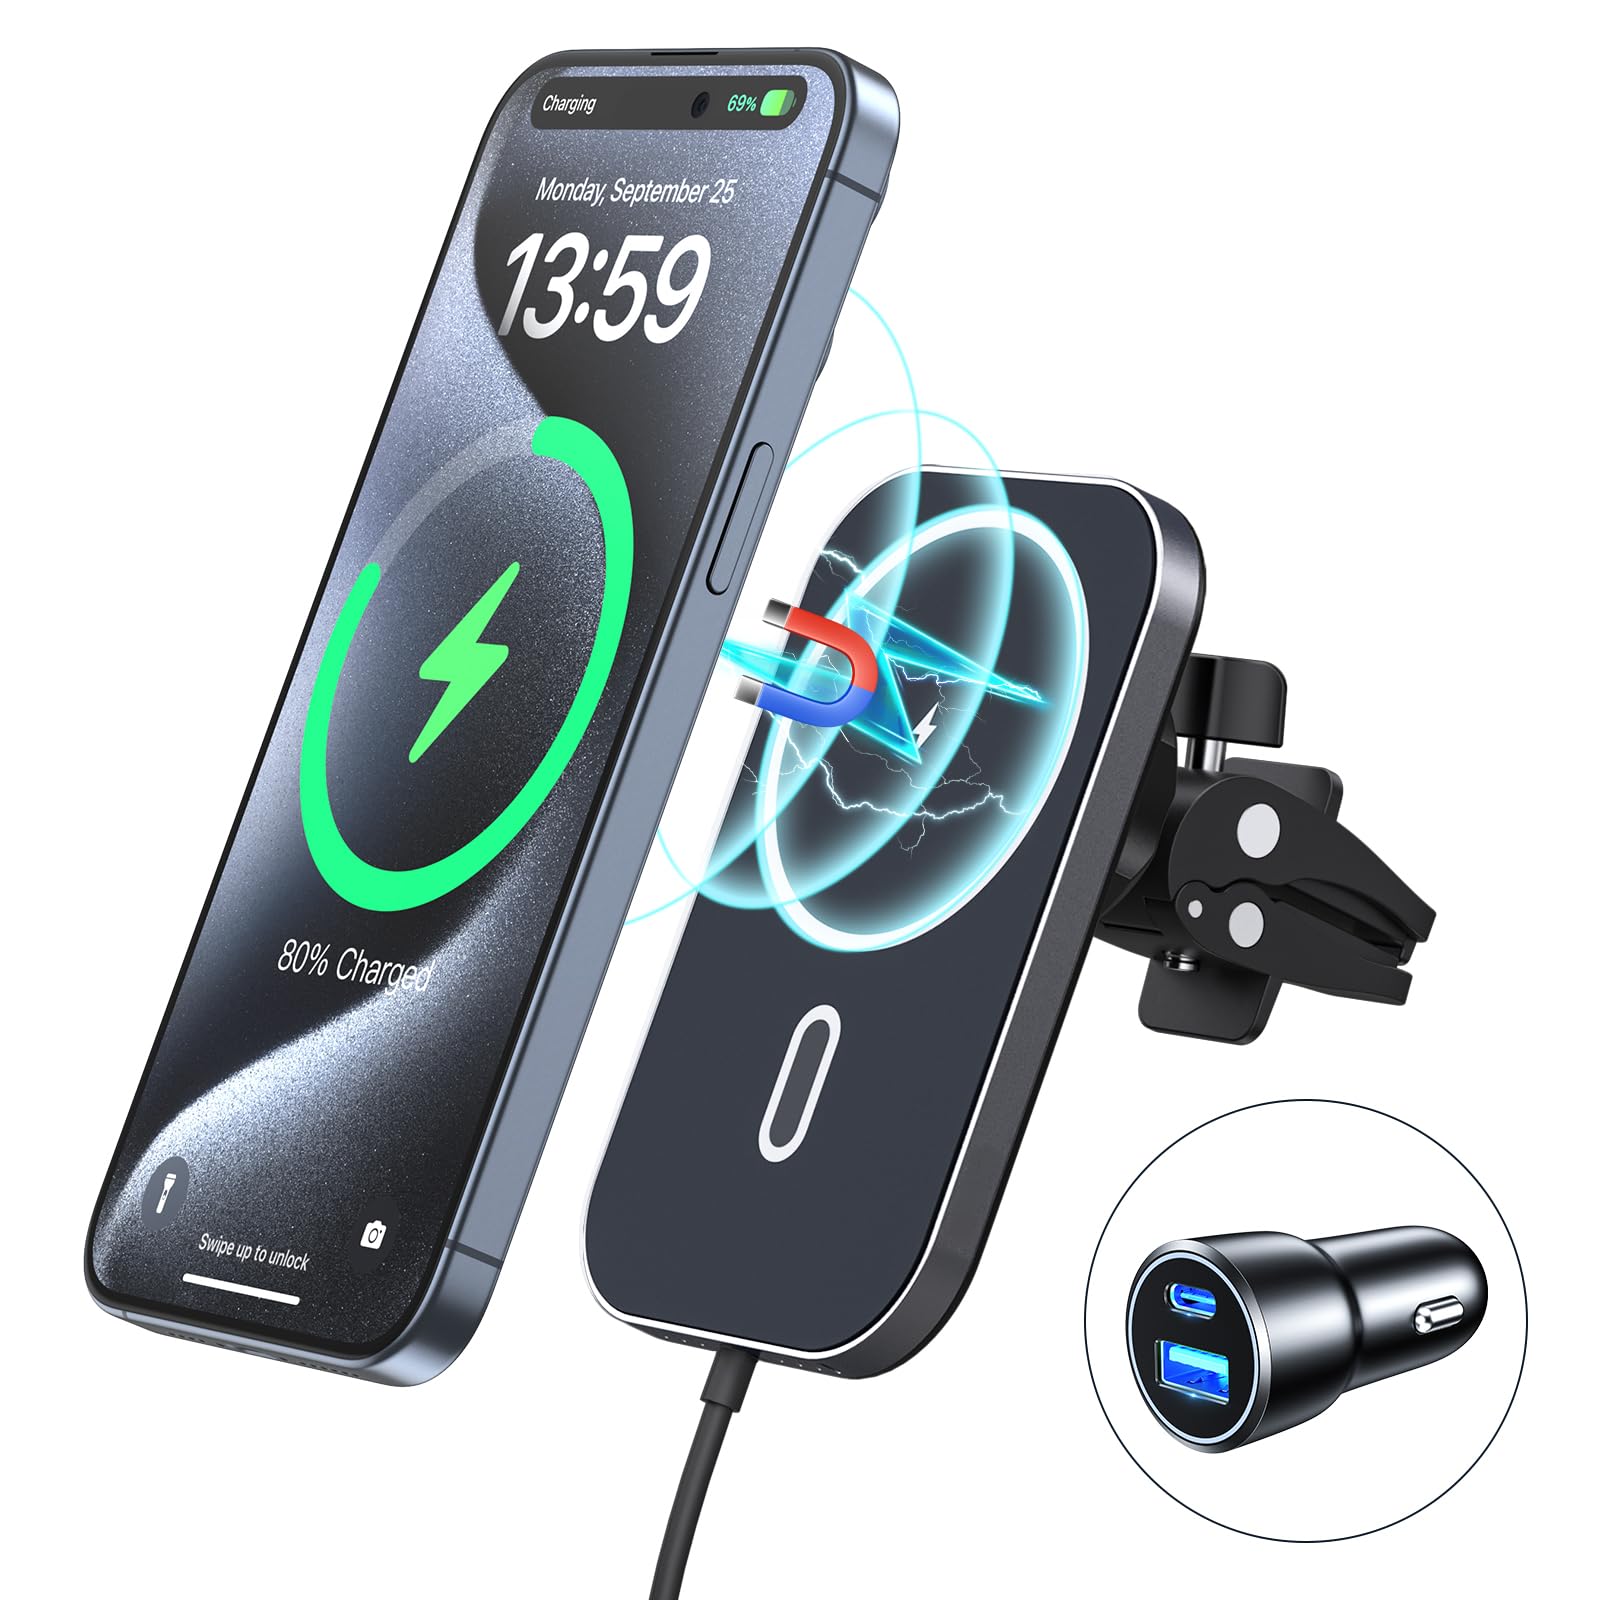 Car charging solutions: Find out about various car charging methods, such as USB car chargers or car mounts with built-in wireless charging capabilities.
Magnetic charging: Explore the convenience of magnetic charging cables and adapters, which provide a secure and hassle-free connection.